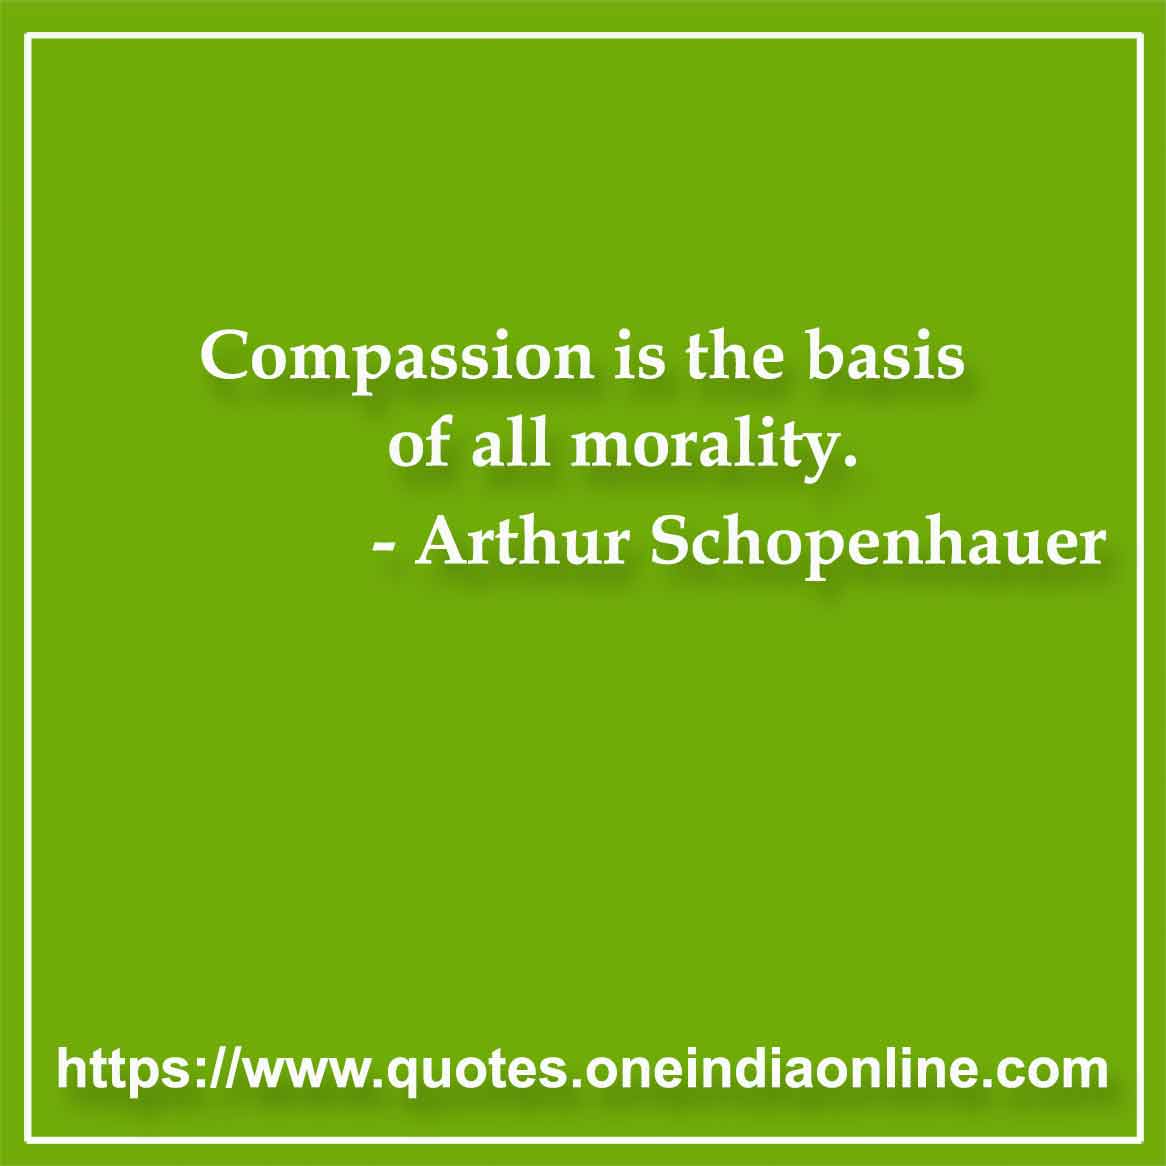 Compassion is the basis of all morality.

- Moral Quotes by Arthur Schopenhauer